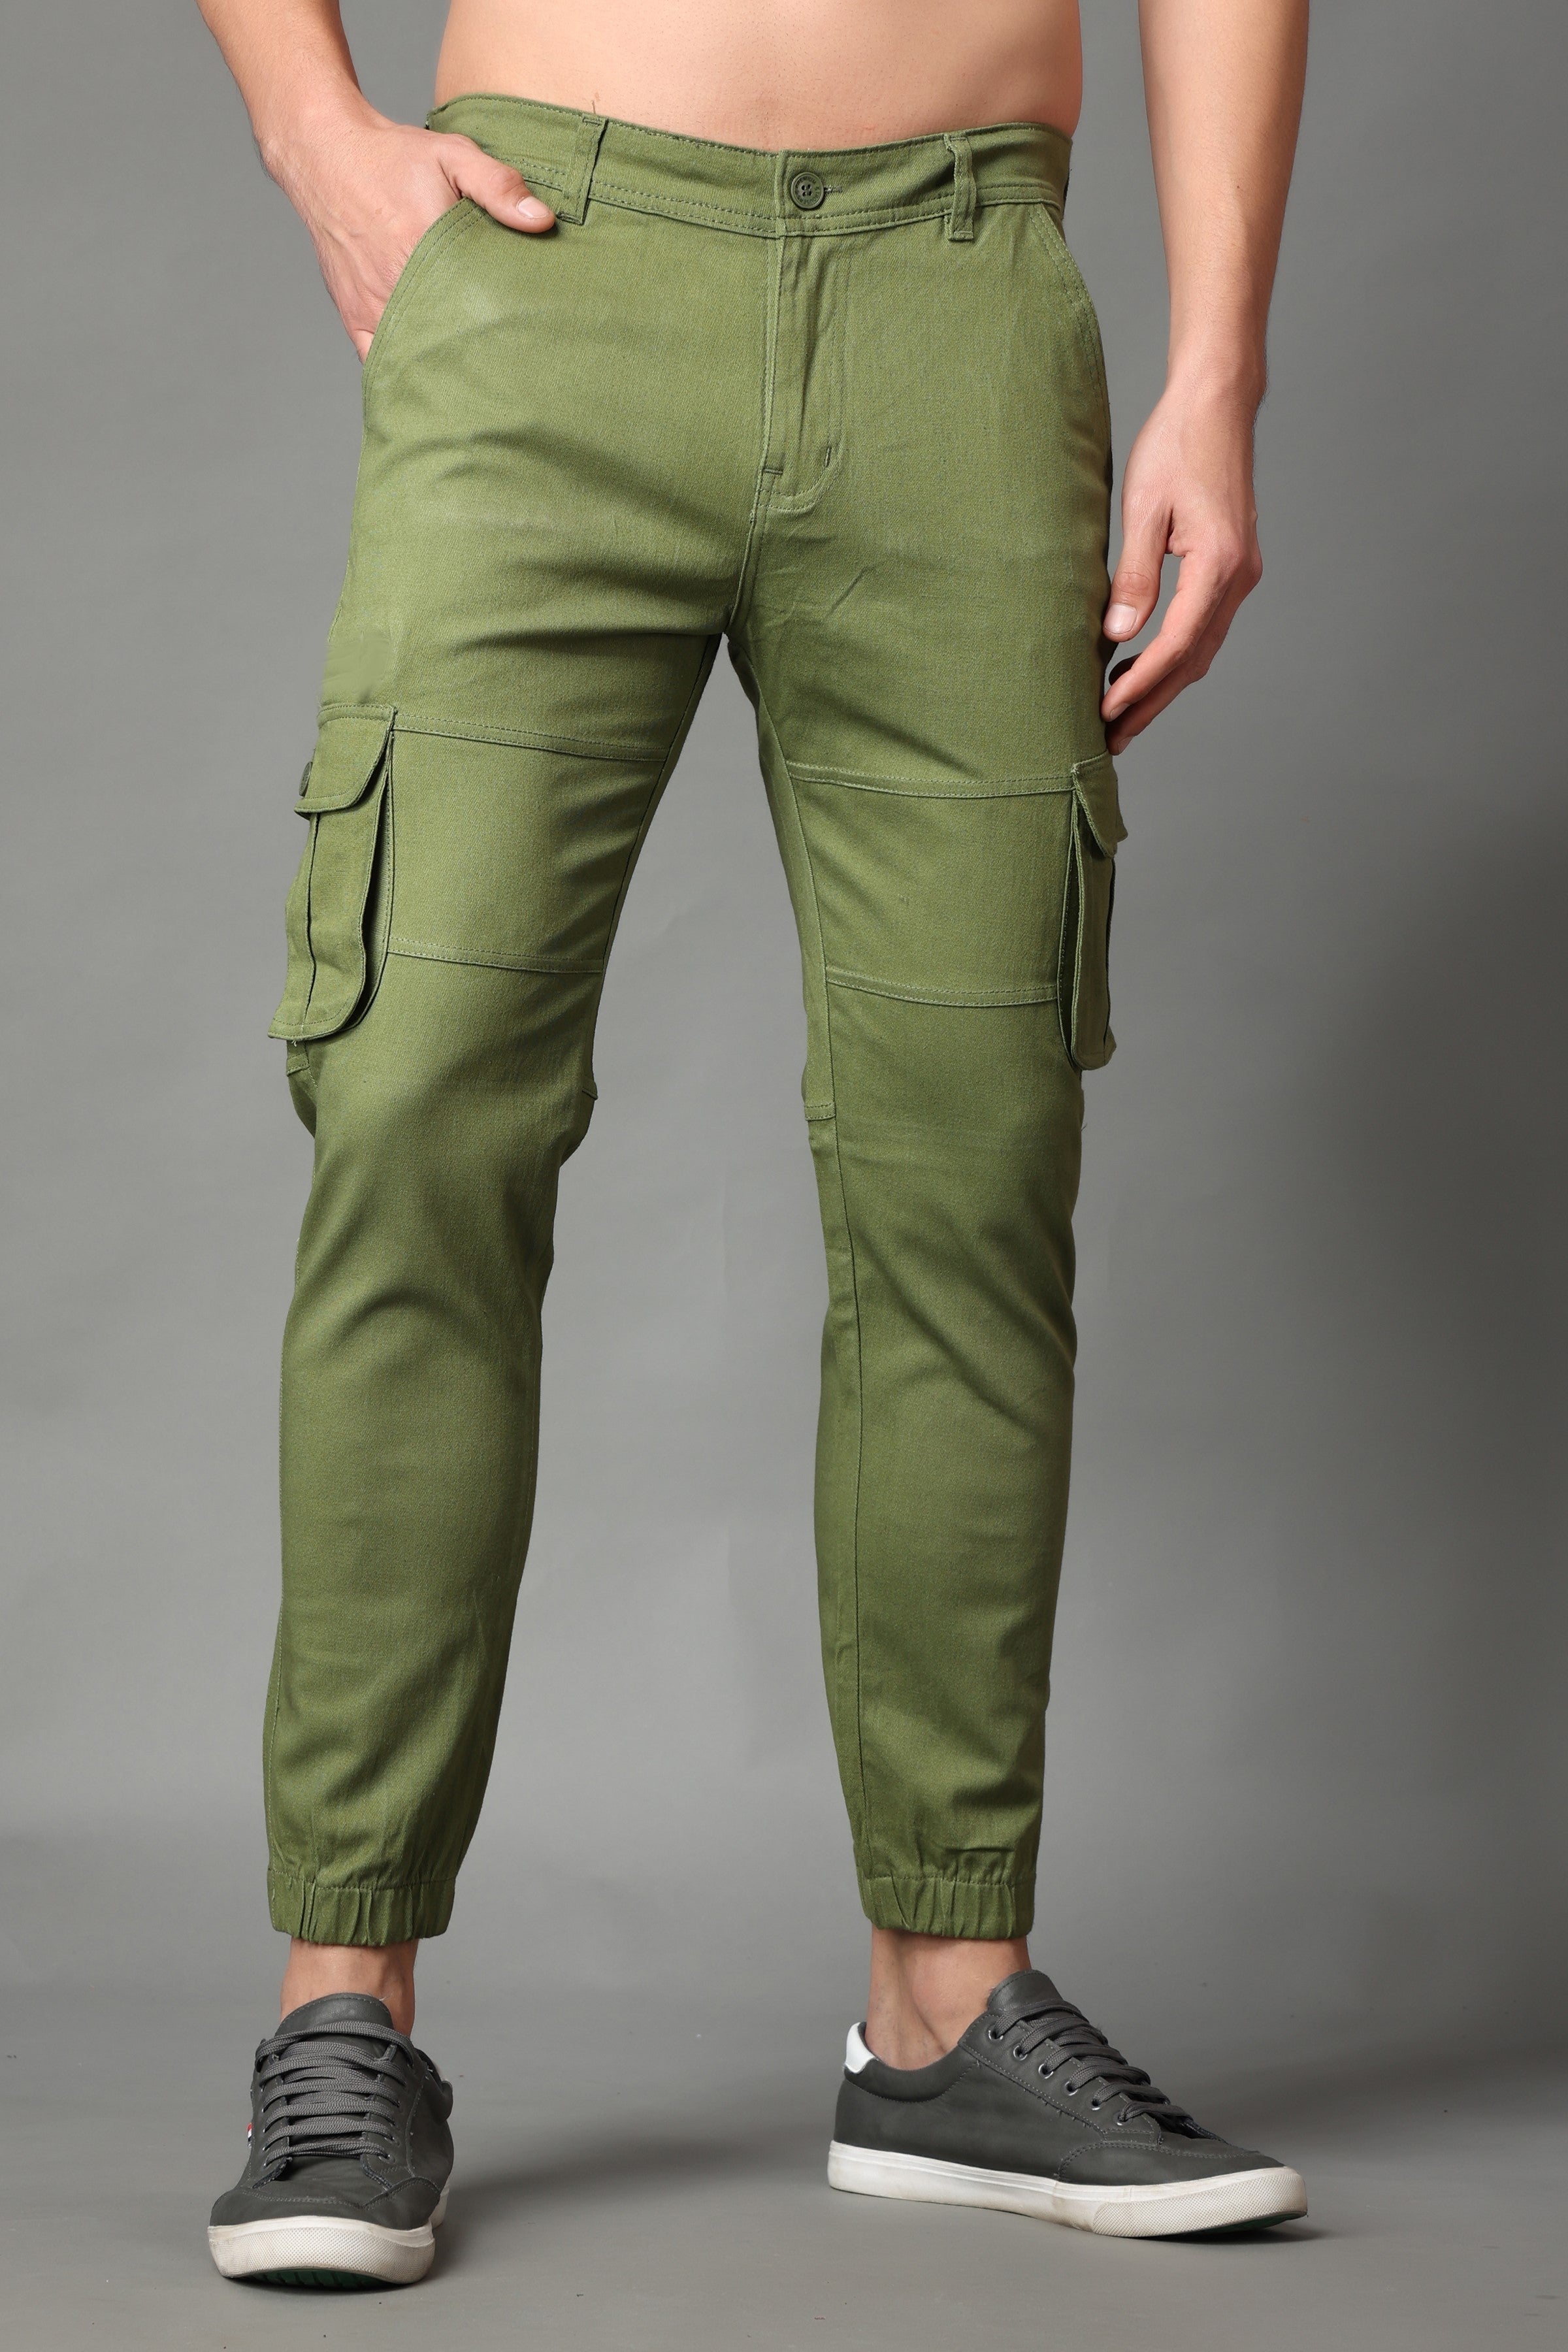 symoid Mens Cargo Pants- Solid Casual Multiple Pockets Outdoor Straight  Type Fitness Pants Cargo Pants Trousers Army Green - Walmart.com